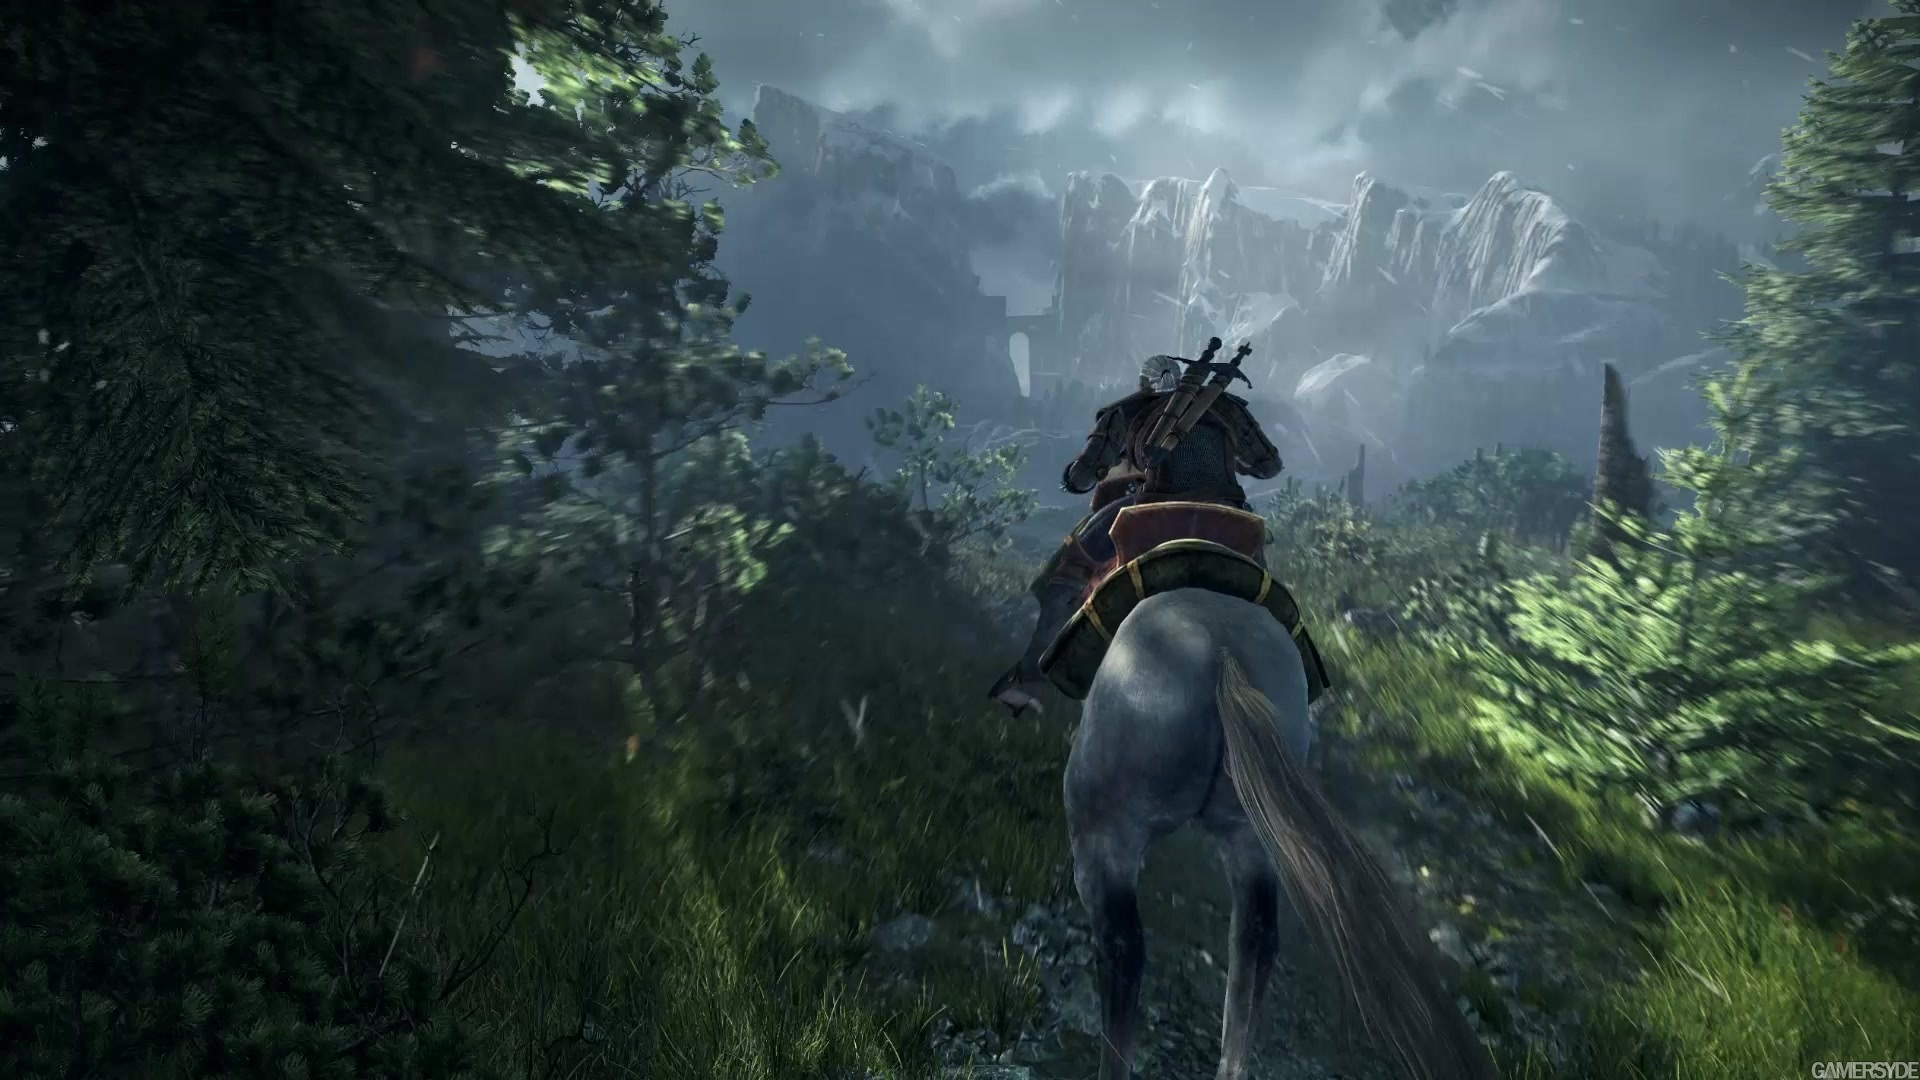 The Witcher 3: Wild Hunt - E3: Gameplay Trailer - High quality stream and  download - Gamersyde